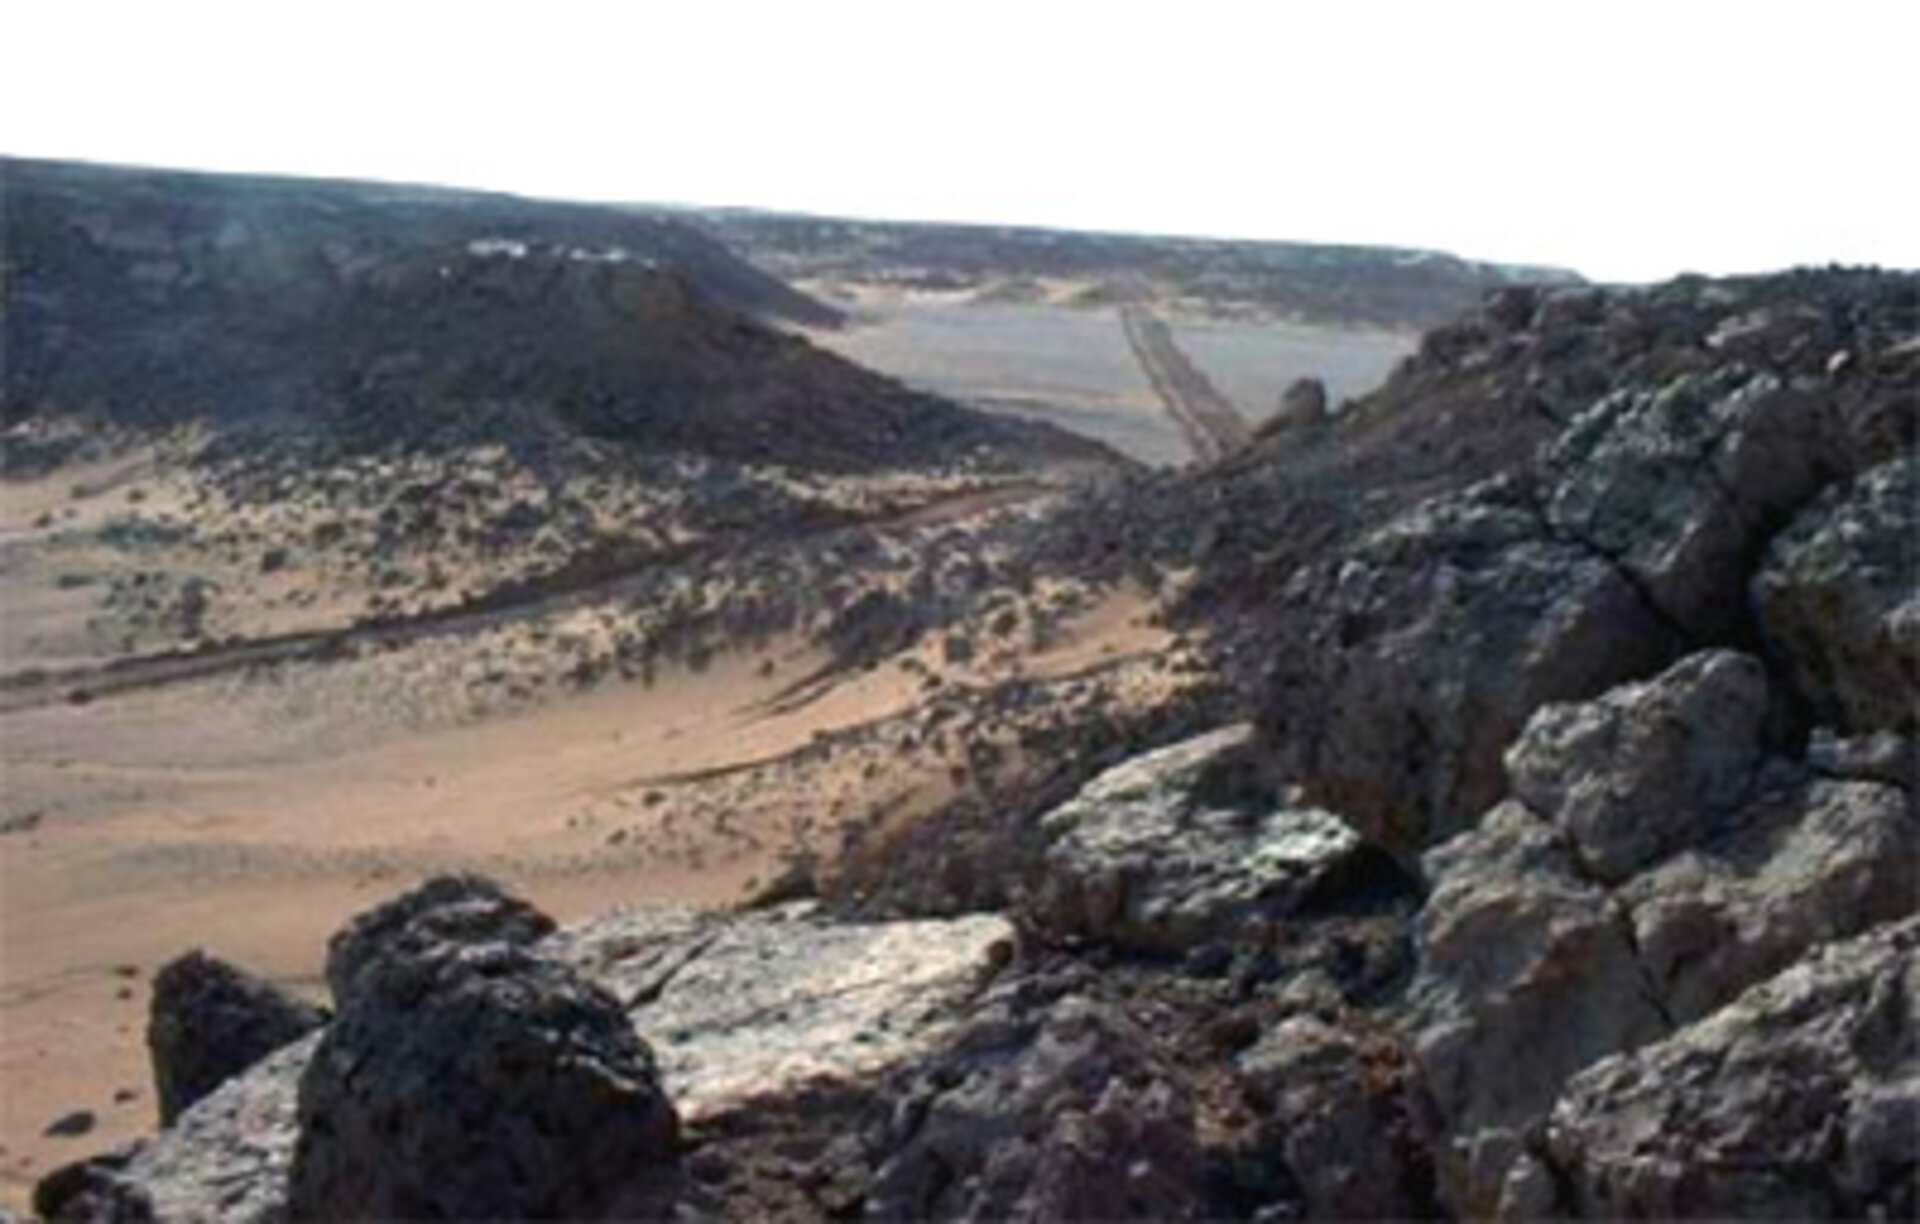 Inaccessible rough terrain in North Africa